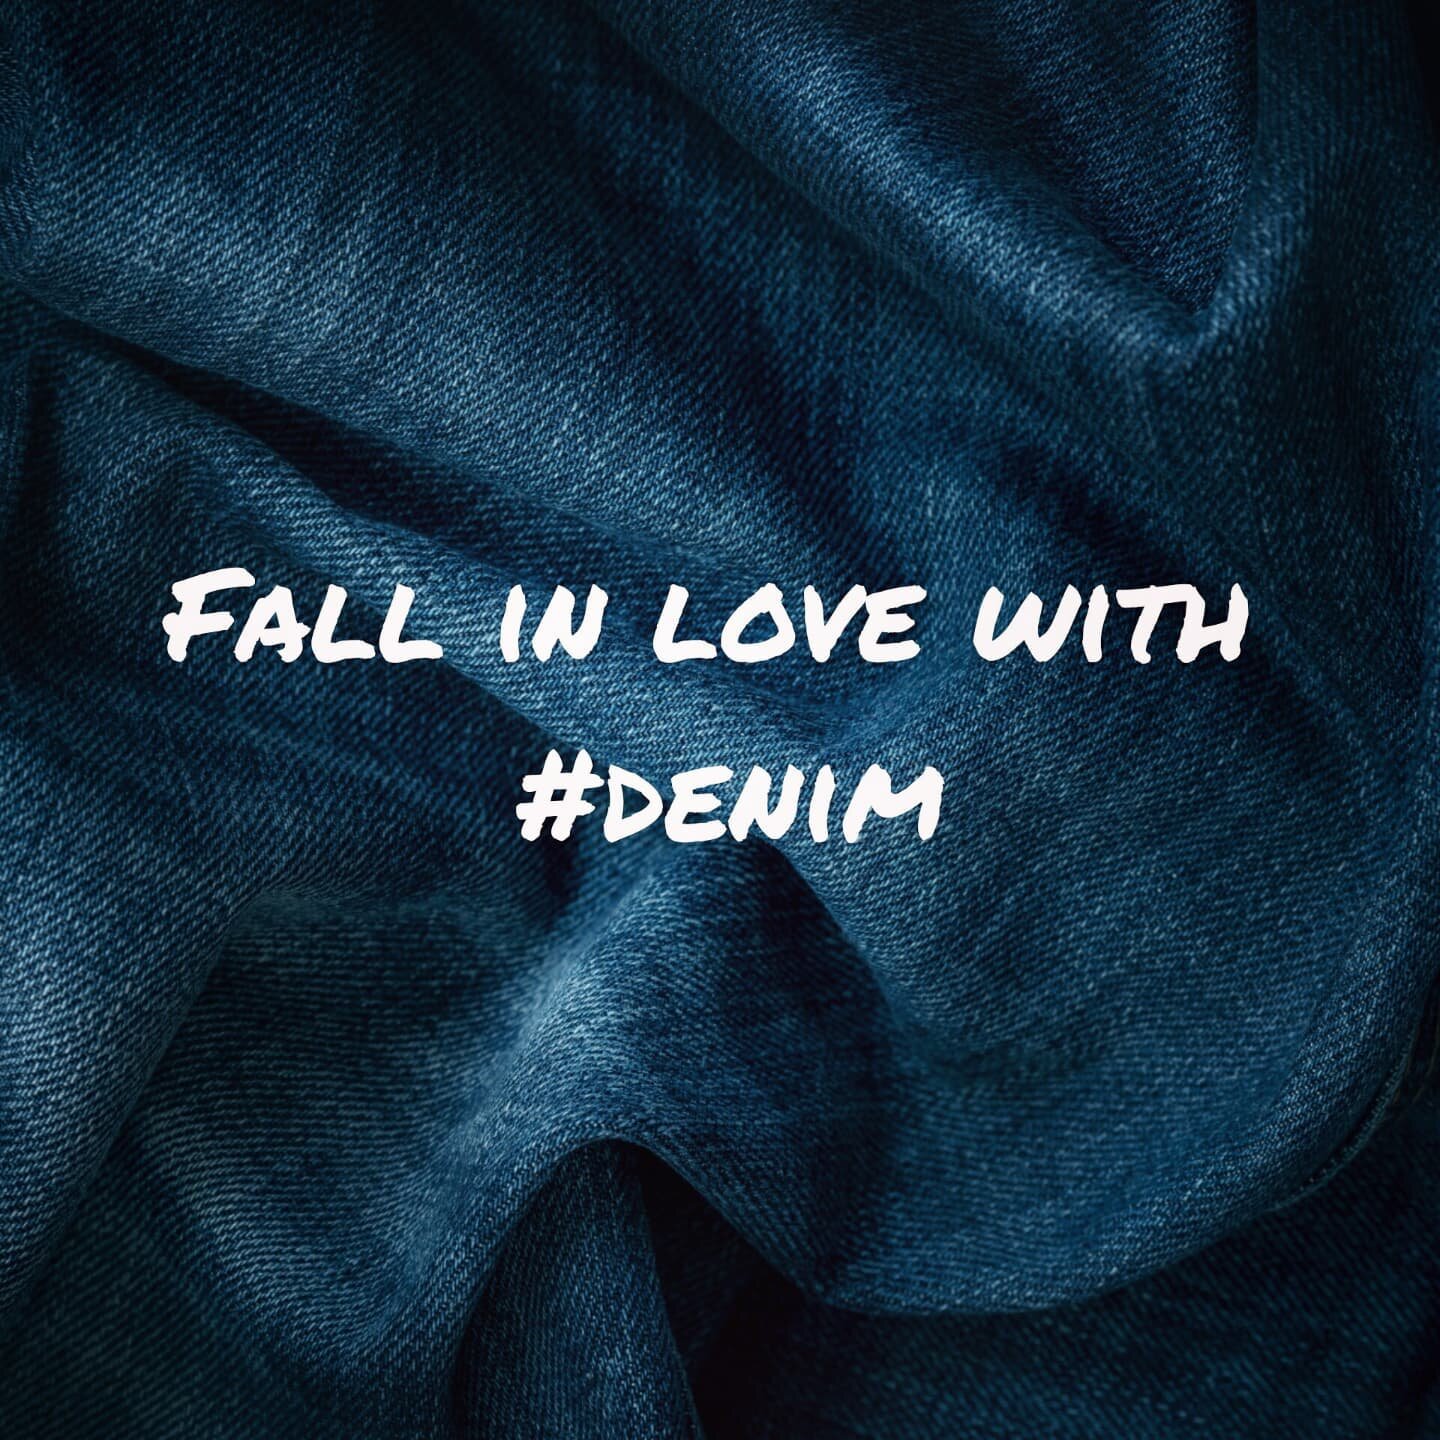 Fall in love with #denim. 👖❤🍂
#denimisawayoflife #fallfashion 
__________
Our wide selection of fashionable, fun and functional #doggear uses recycled denim as the core product material. Masks, harnesses, leashes and MORE! 👖
___________
#mistermig